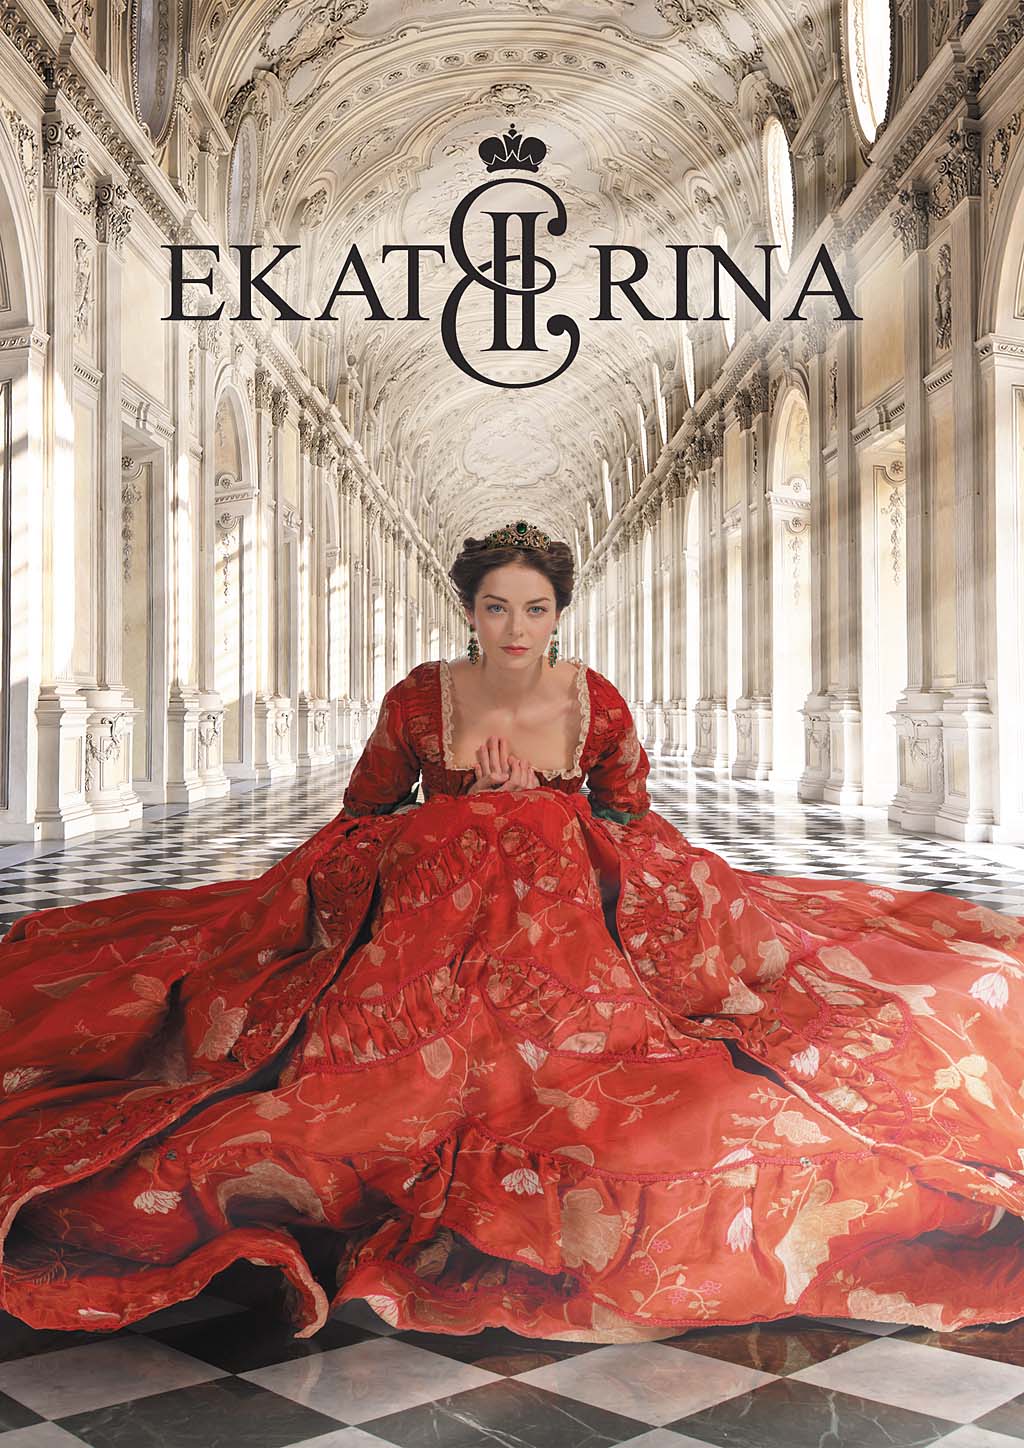 TV-SERIES EKATERINA WILL BE AIRED IN JAPAN FOR THE FIRST TIME